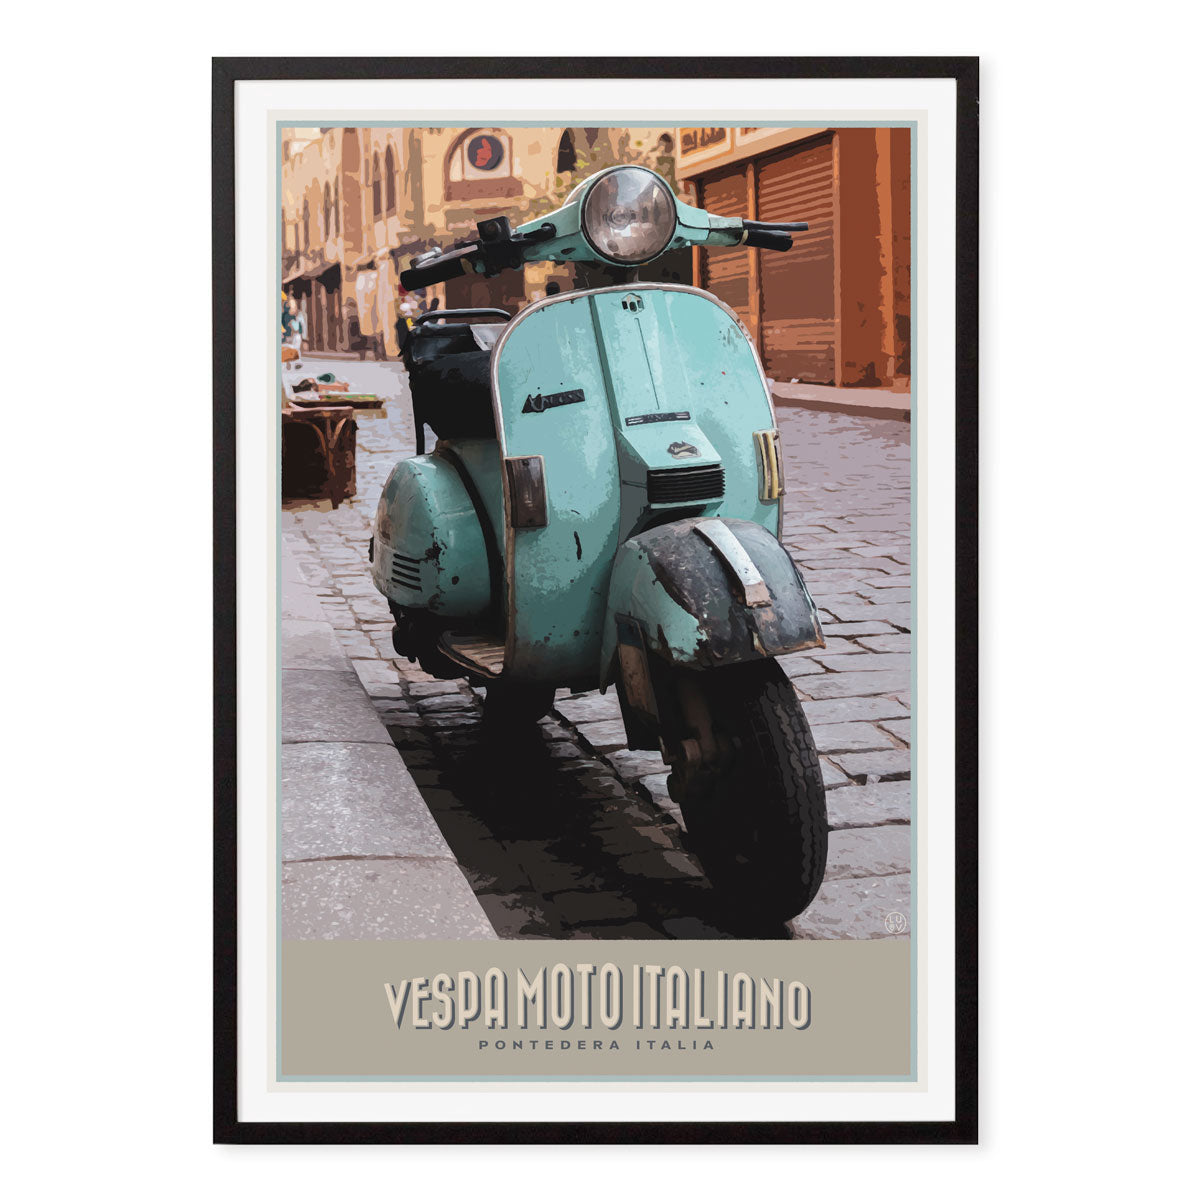 Vespa italy vintage retro poster print in black frame by Places We Luv